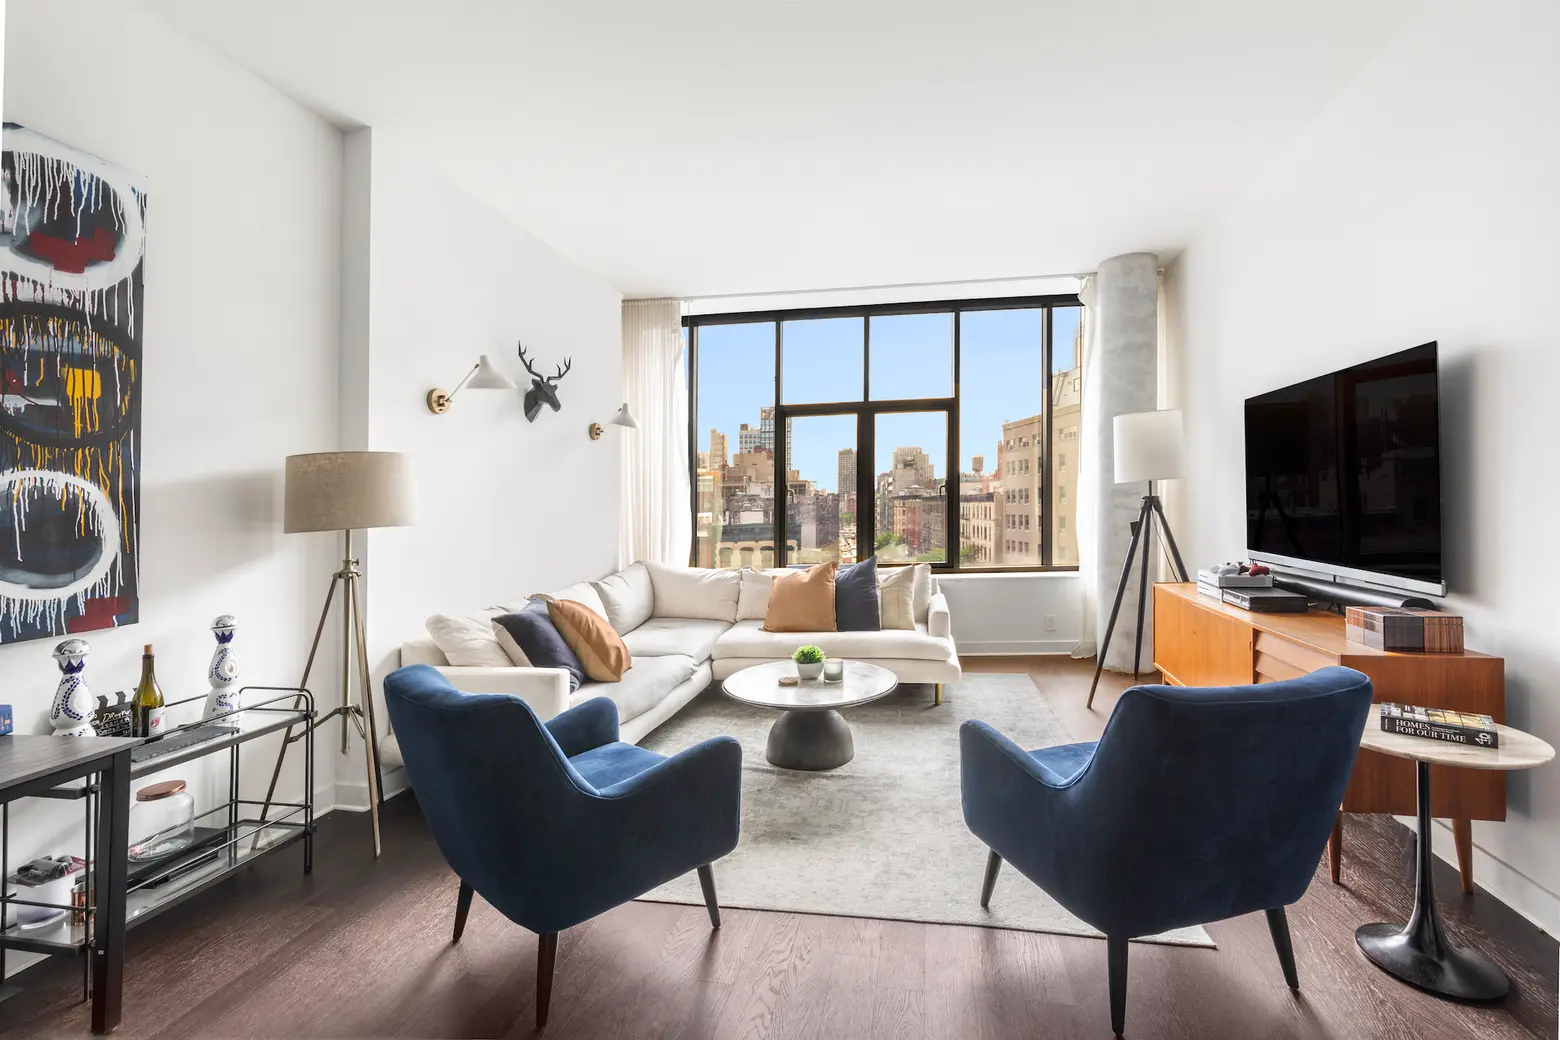 Mindy Kaling is selling her Soho condo for $2.75M